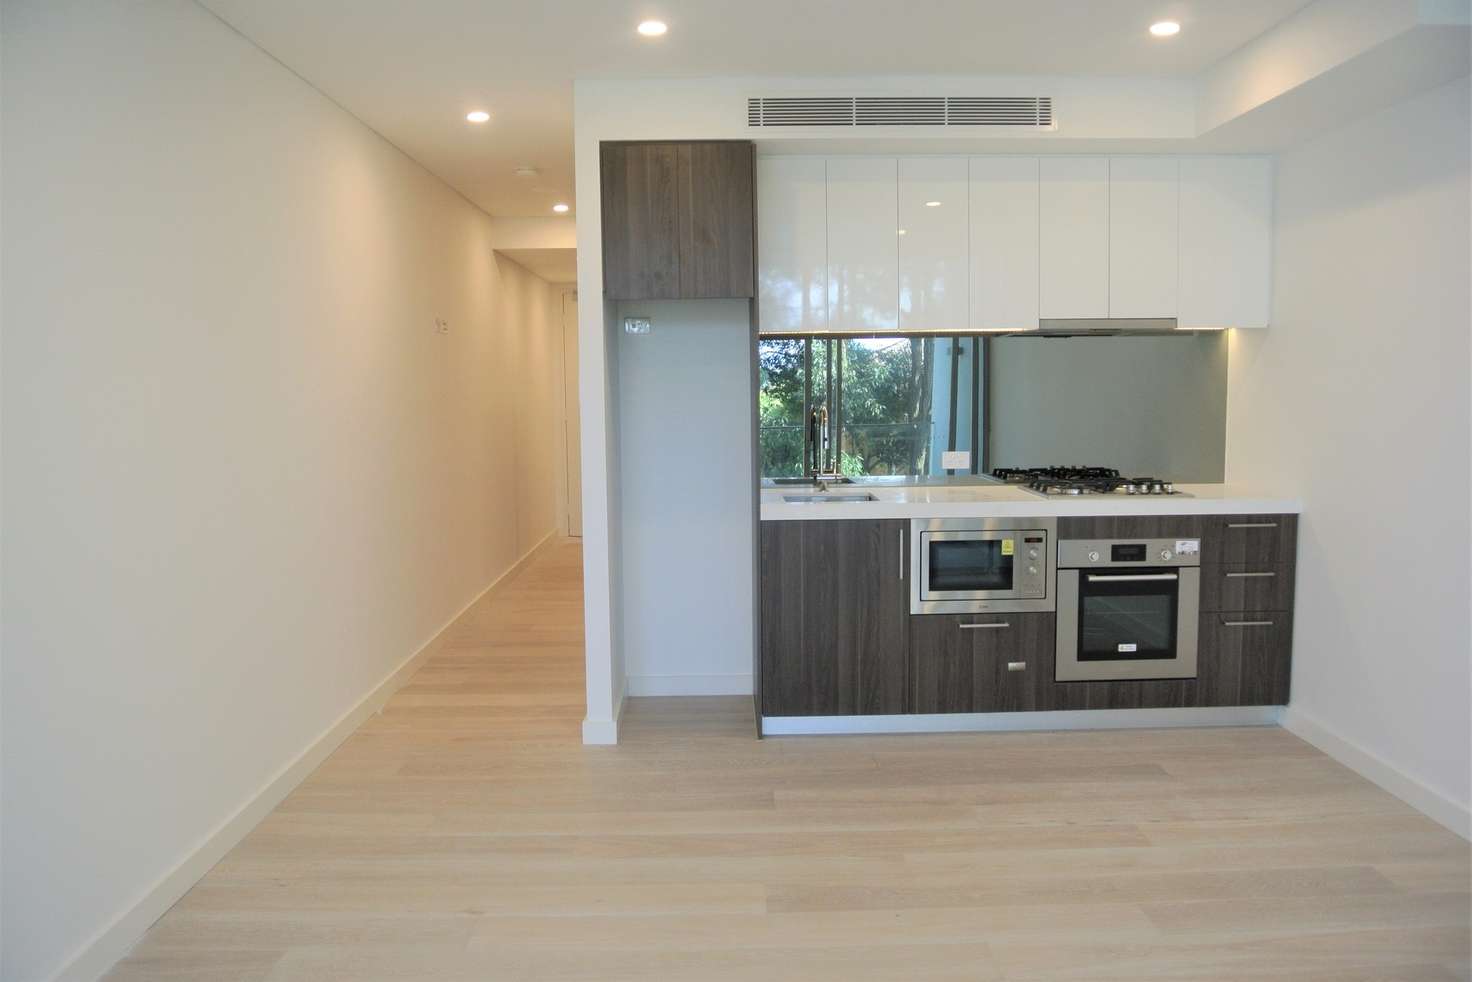 Main view of Homely apartment listing, 618/88 Anzac Parade, Kensington NSW 2033